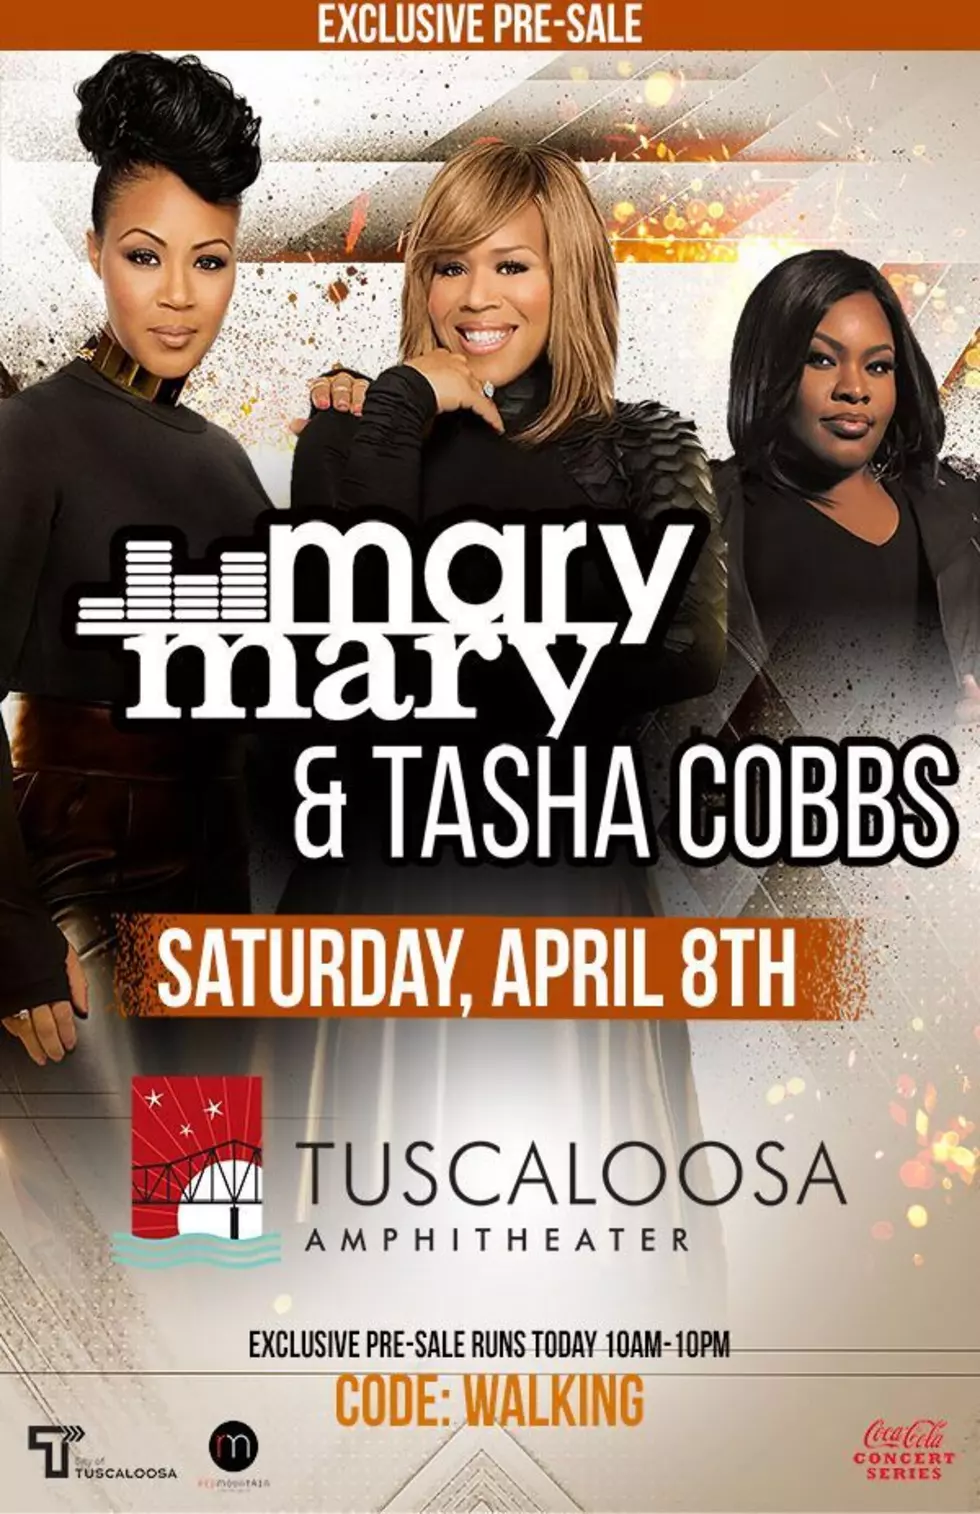 Contest Alert: Contest Alert: All Day Tuesday Listen to Win Tickets to See Mary Mary In Concert at The Tuscaloosa Amp.